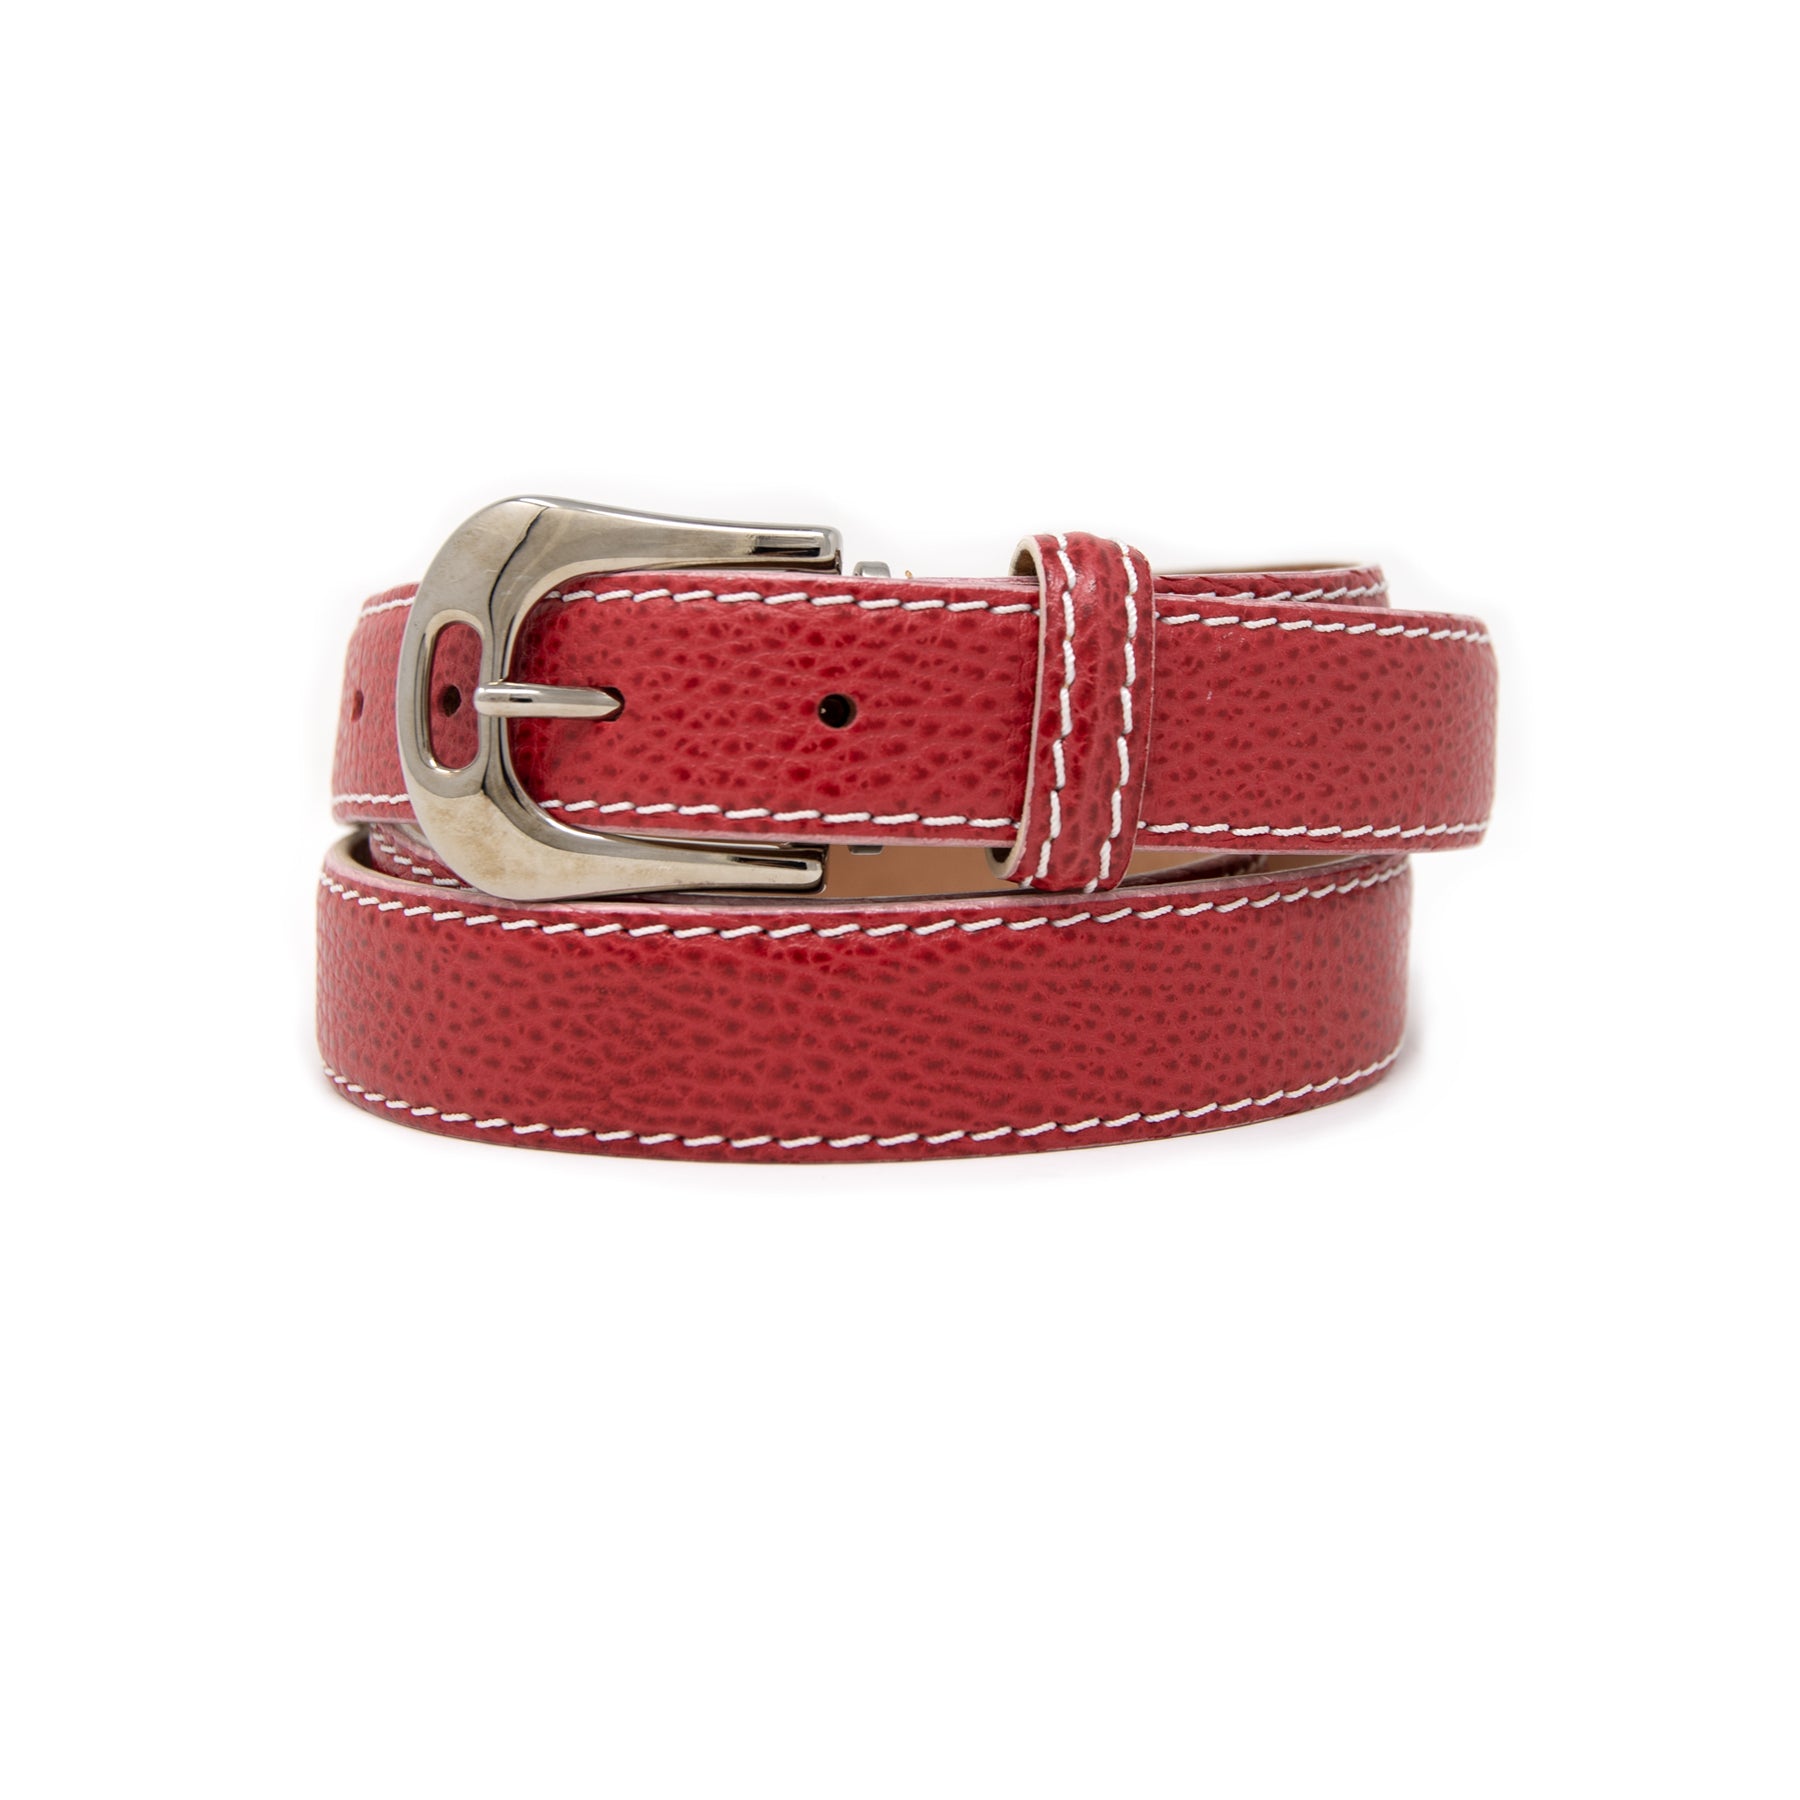 Limited Edition - Pebble Grain Belt 30mm - Red